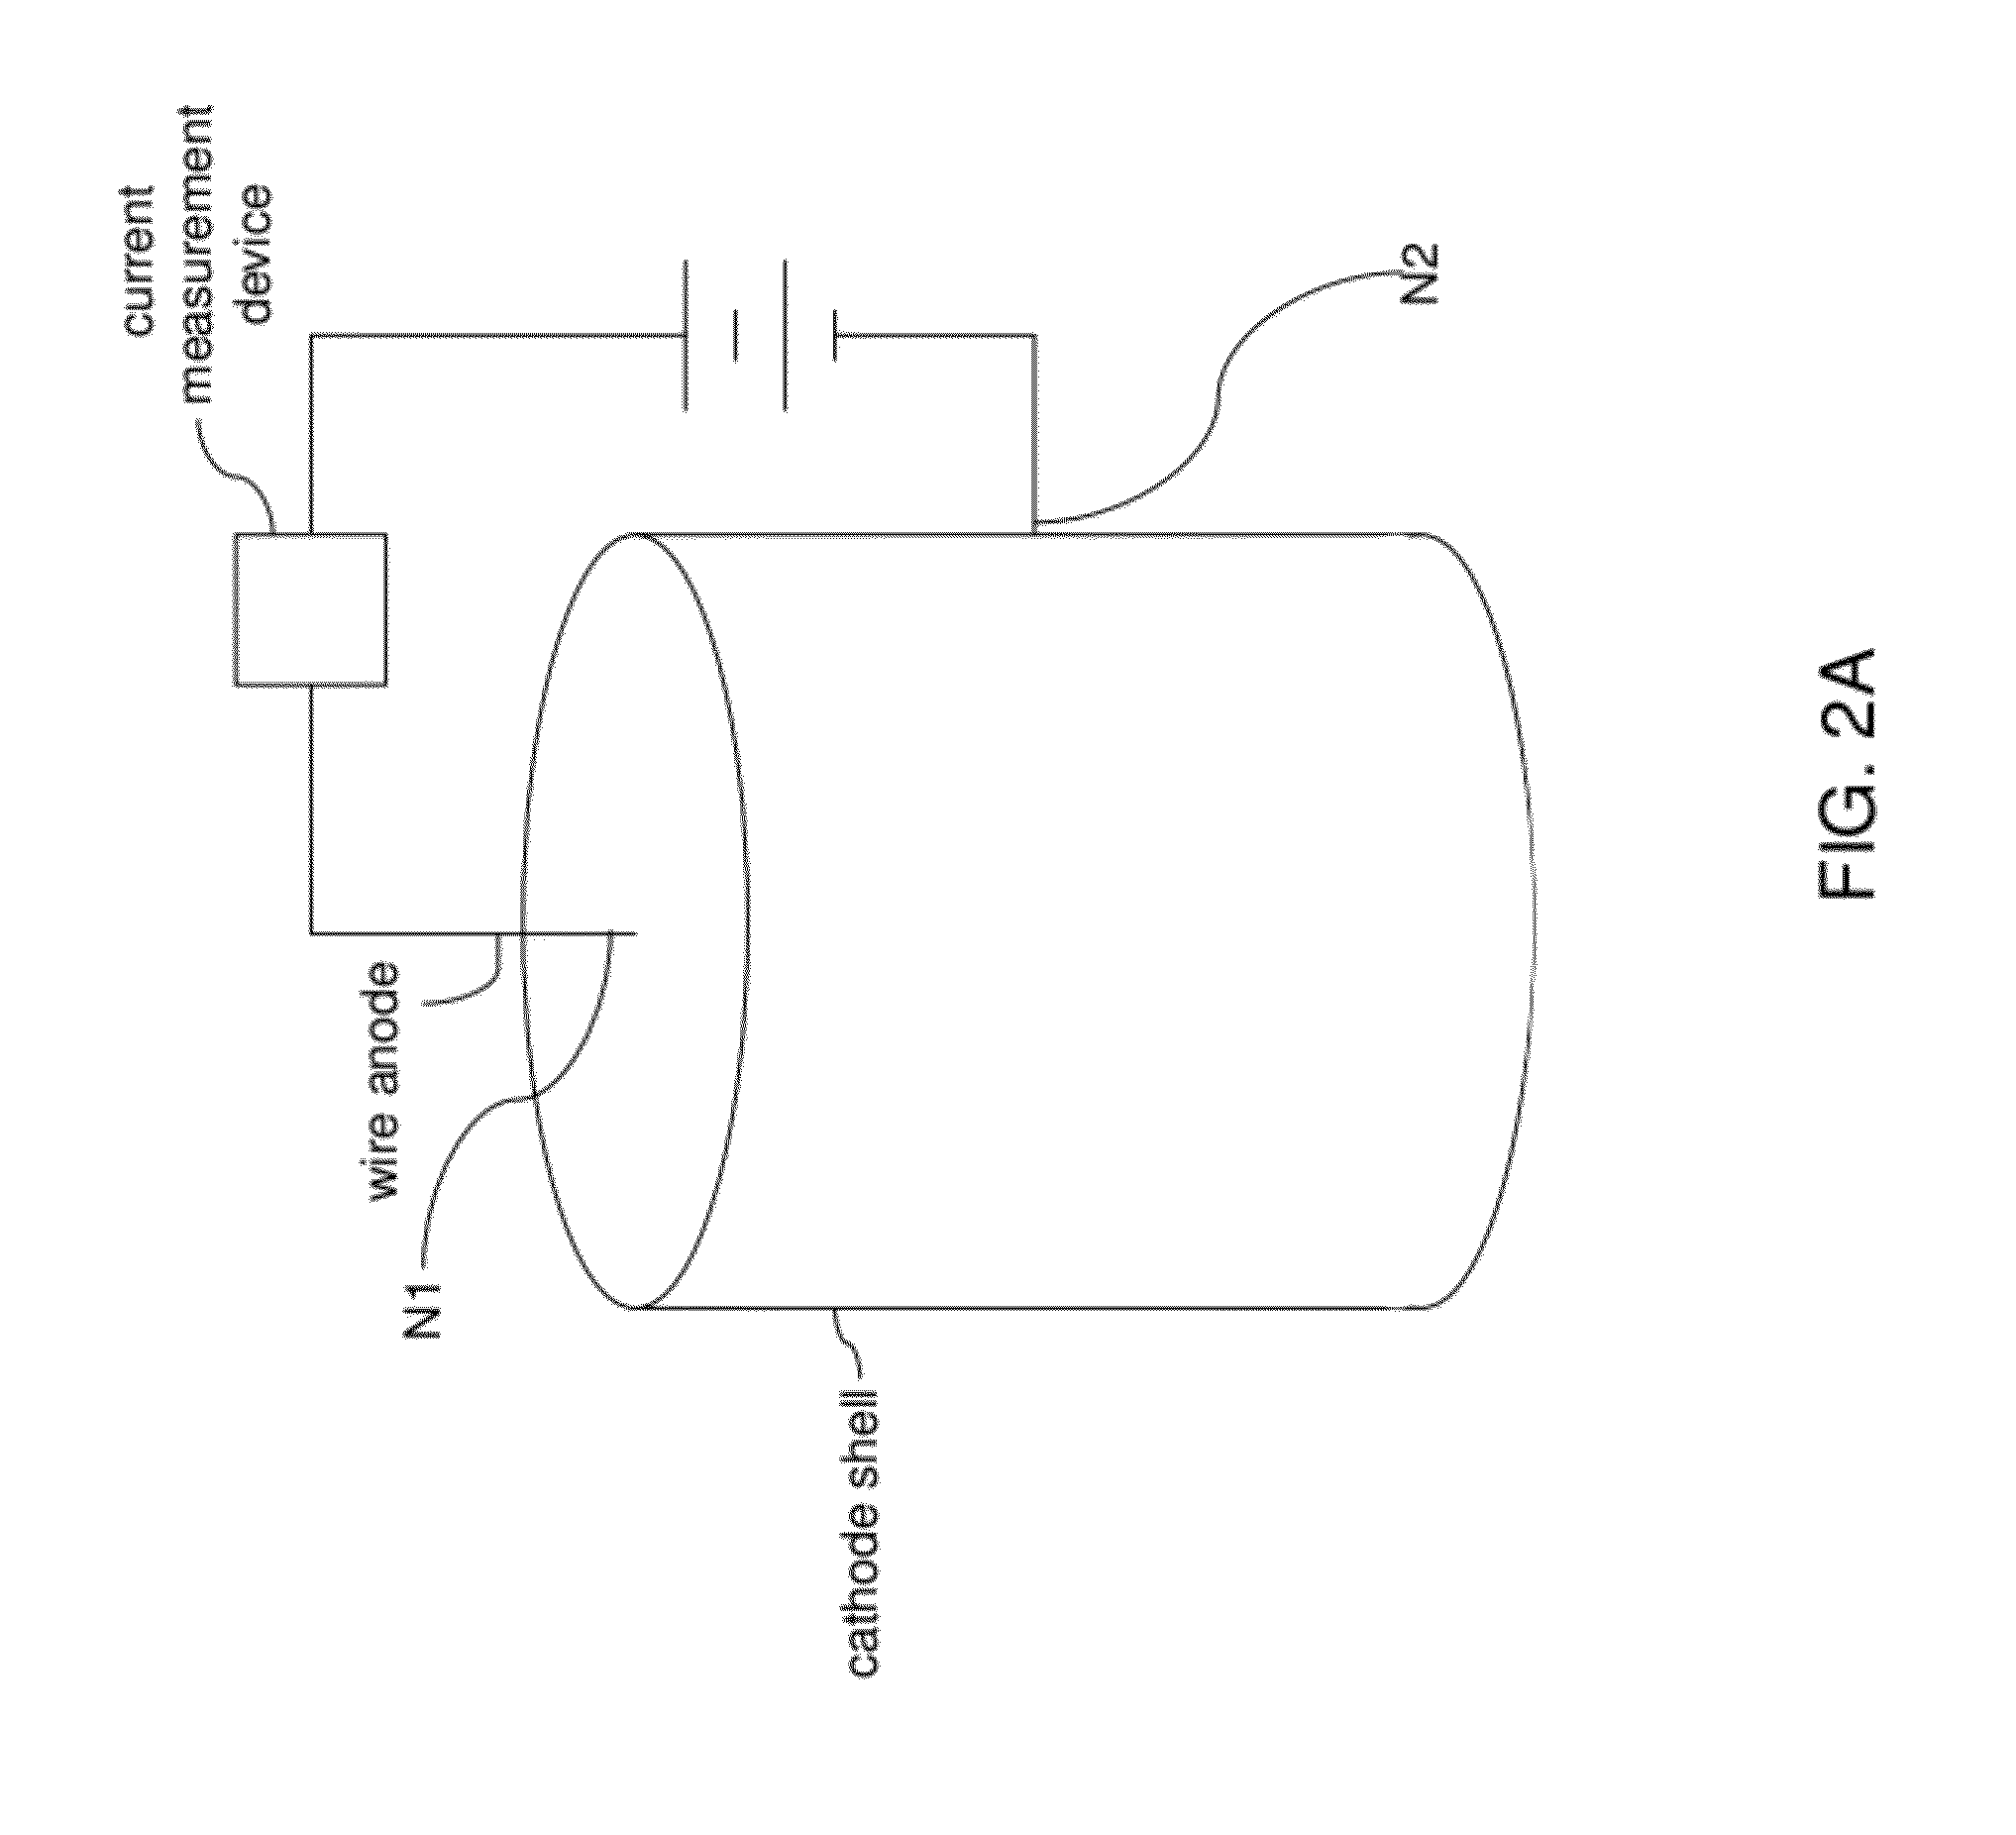 High efficiency proportional neutron detector with solid liner internal structures